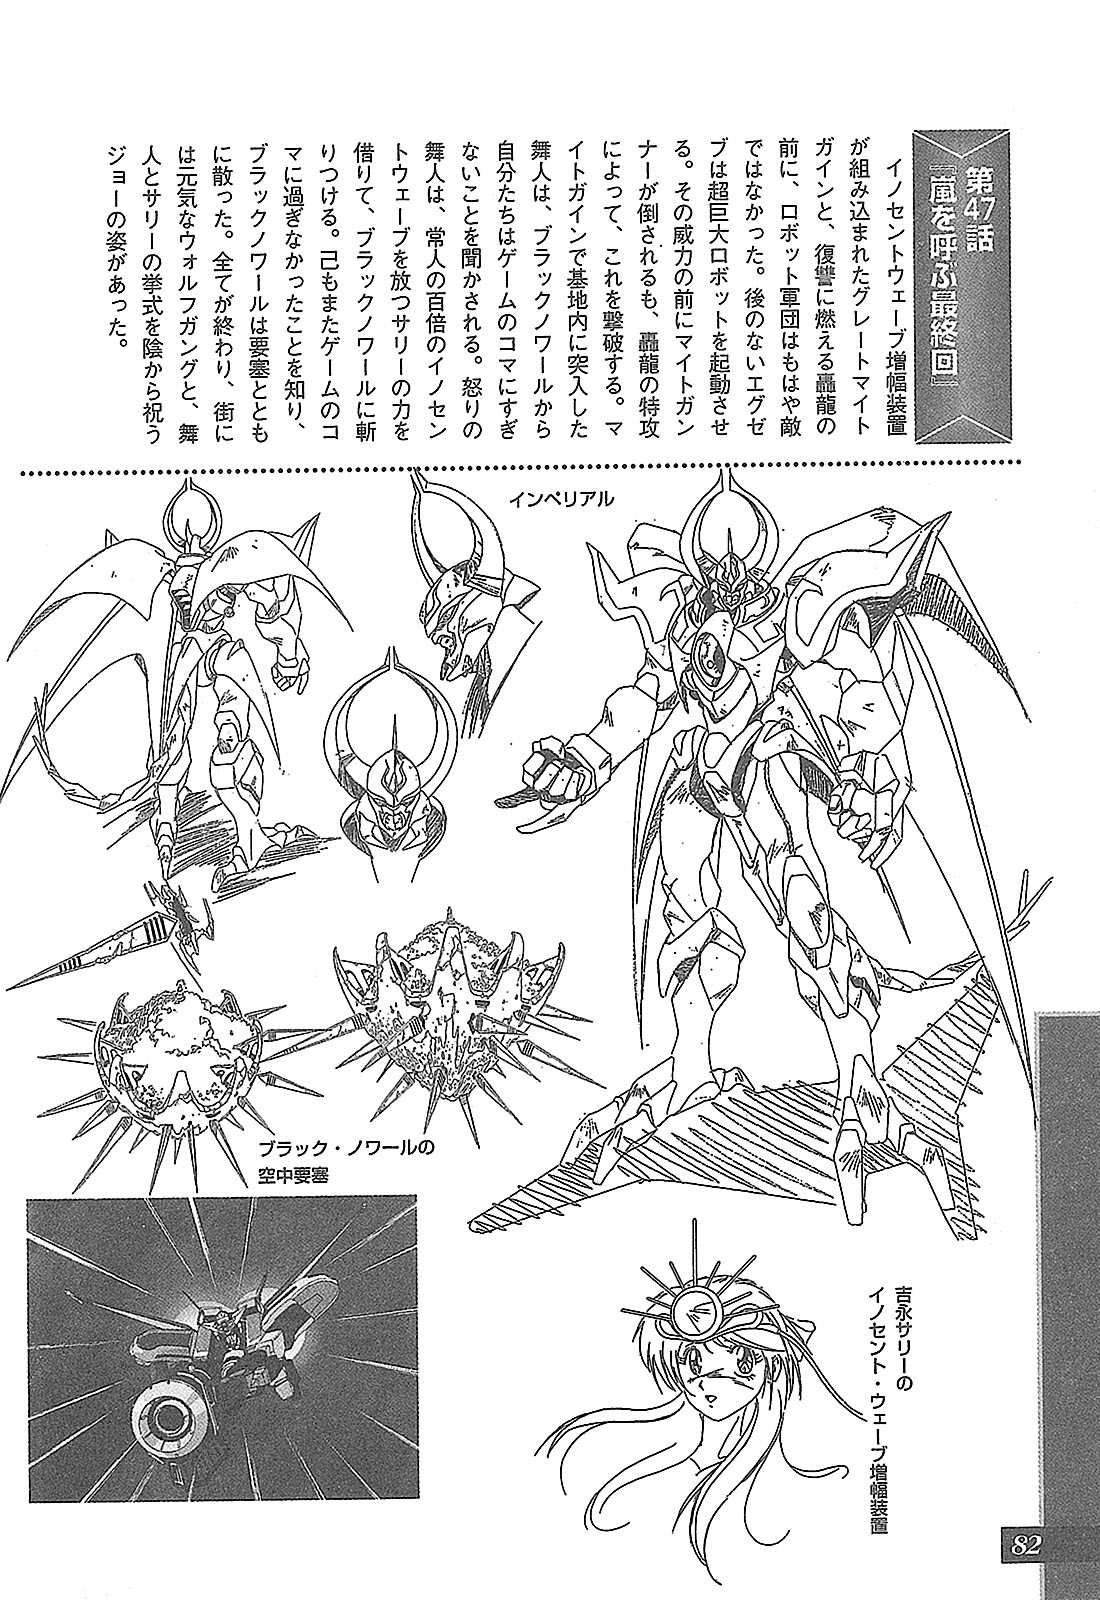 Dengeki Hobby Books - Data Collection No.11 - The Brave Express Might Gaine 83